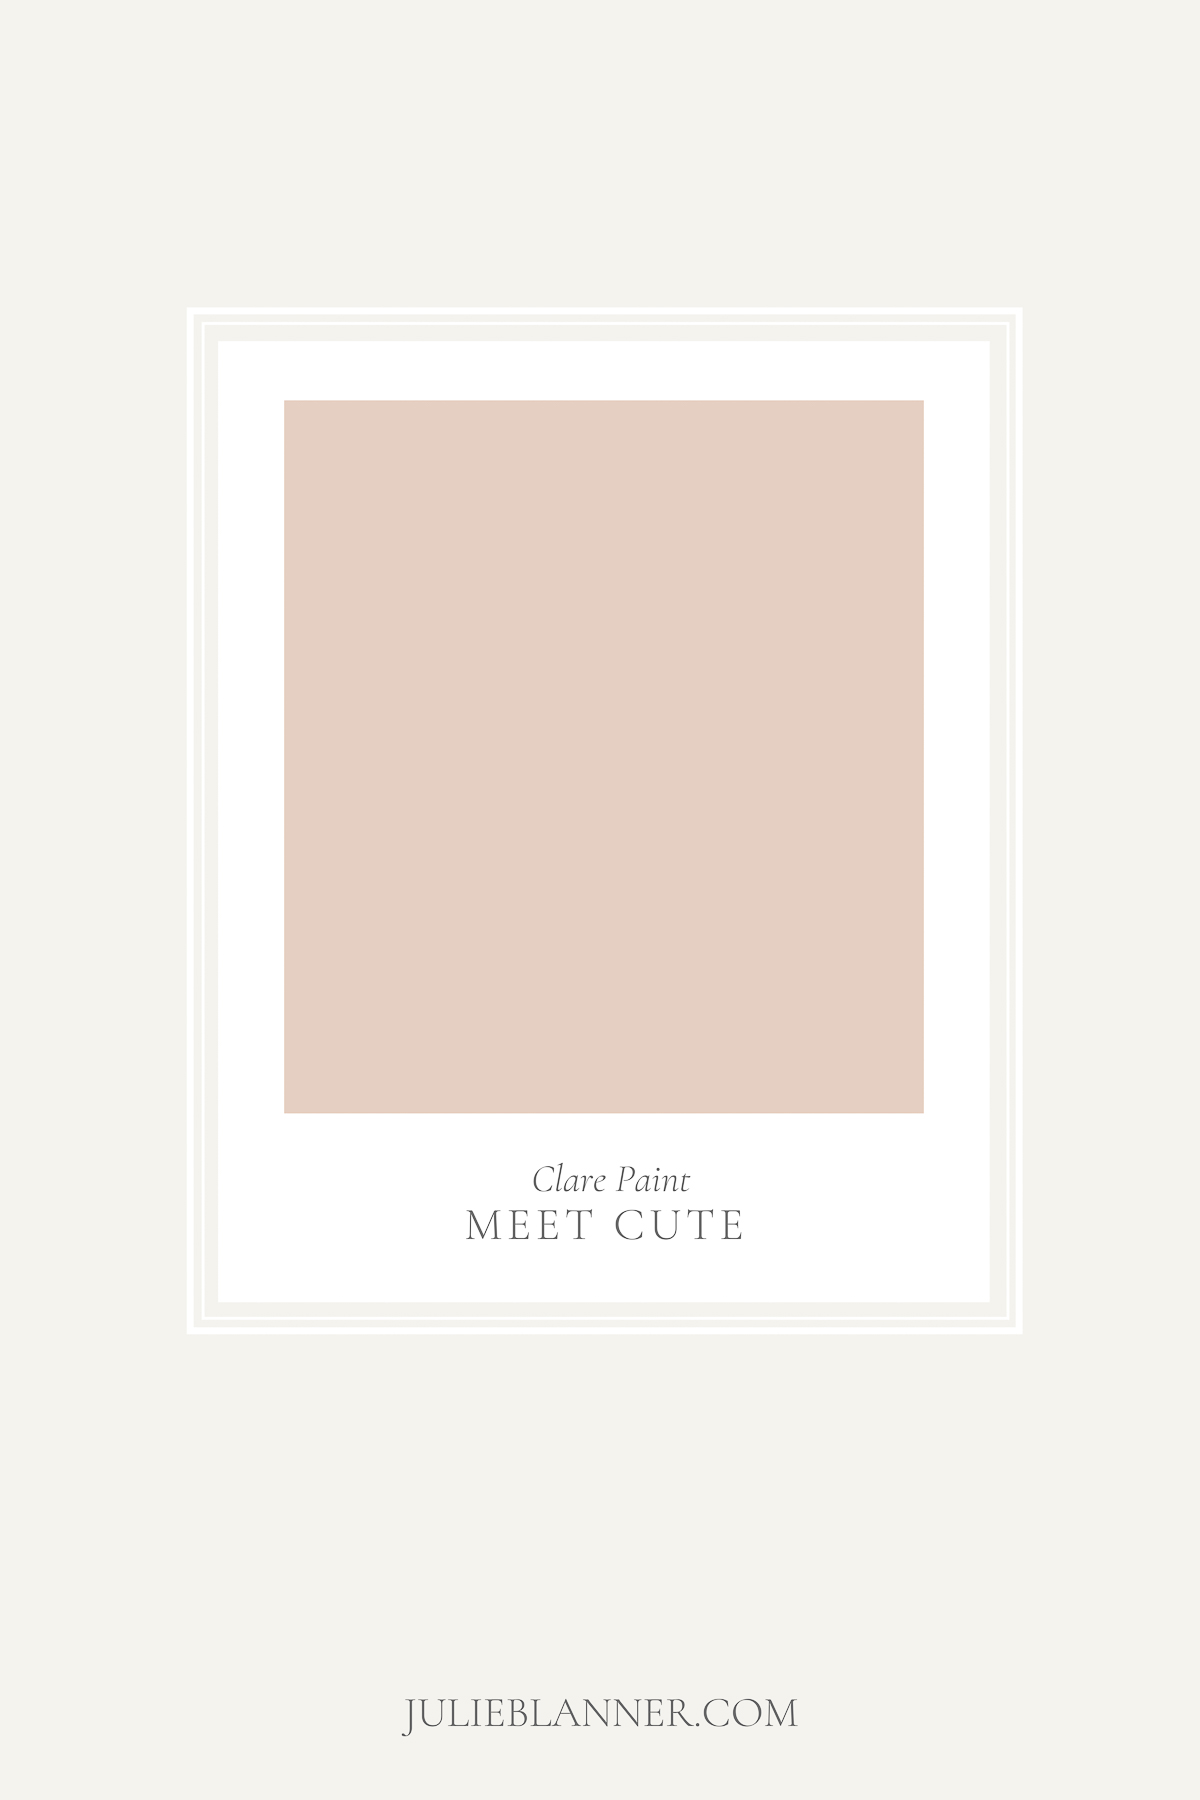 A paint swatch for Clare Paint Meet Cute, a blush pink paint color, shared at Julieblanner.com